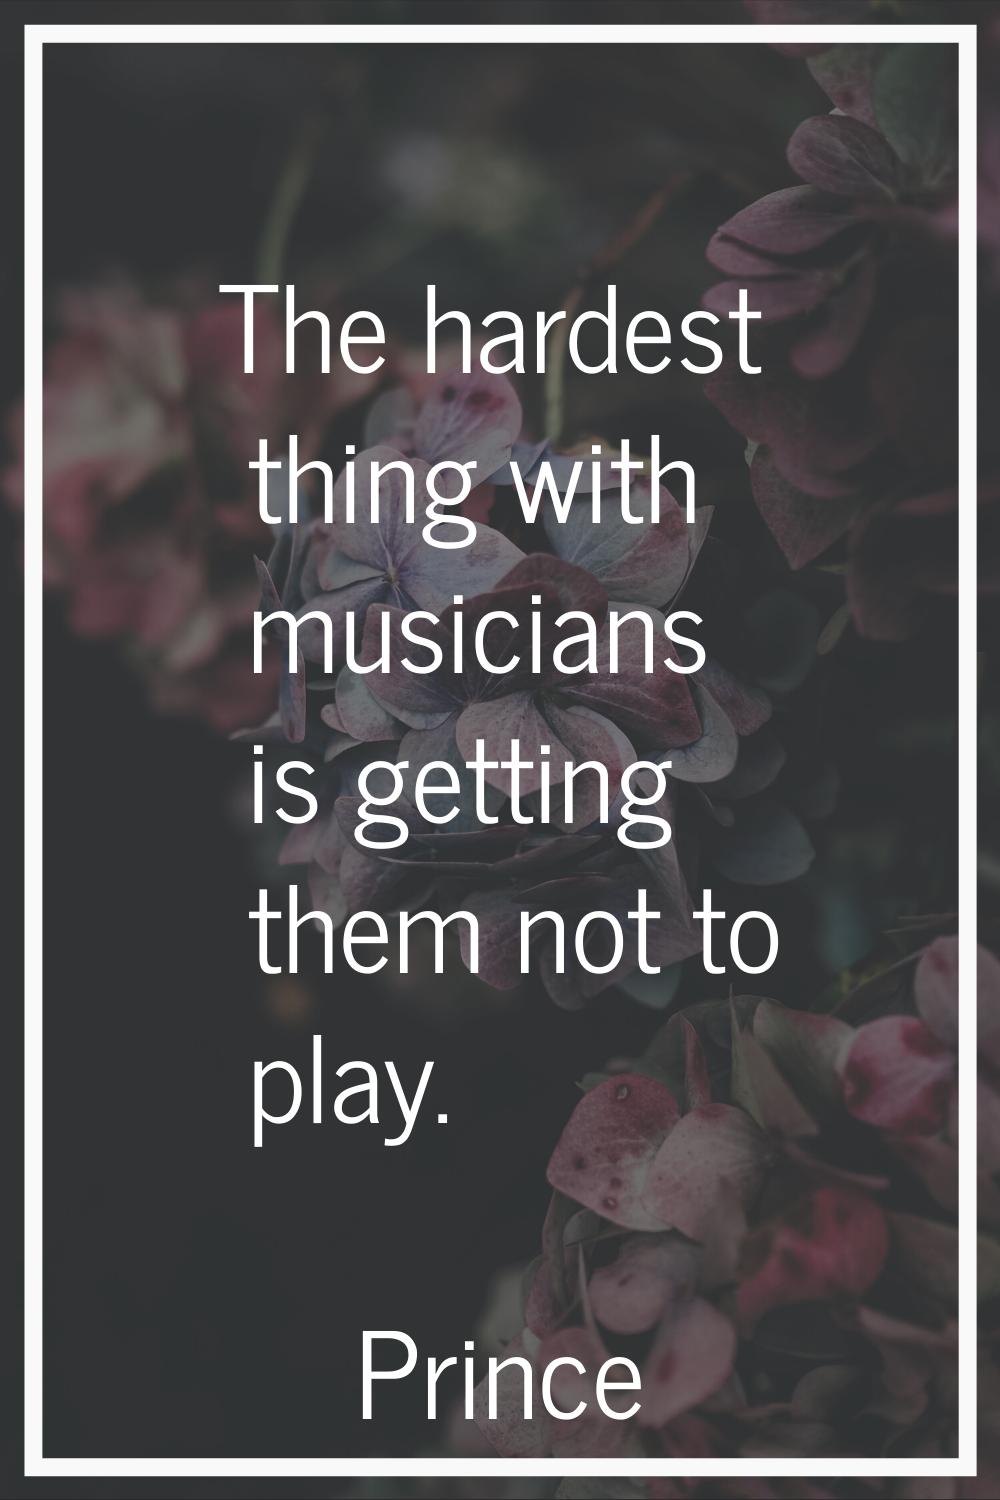 The hardest thing with musicians is getting them not to play.